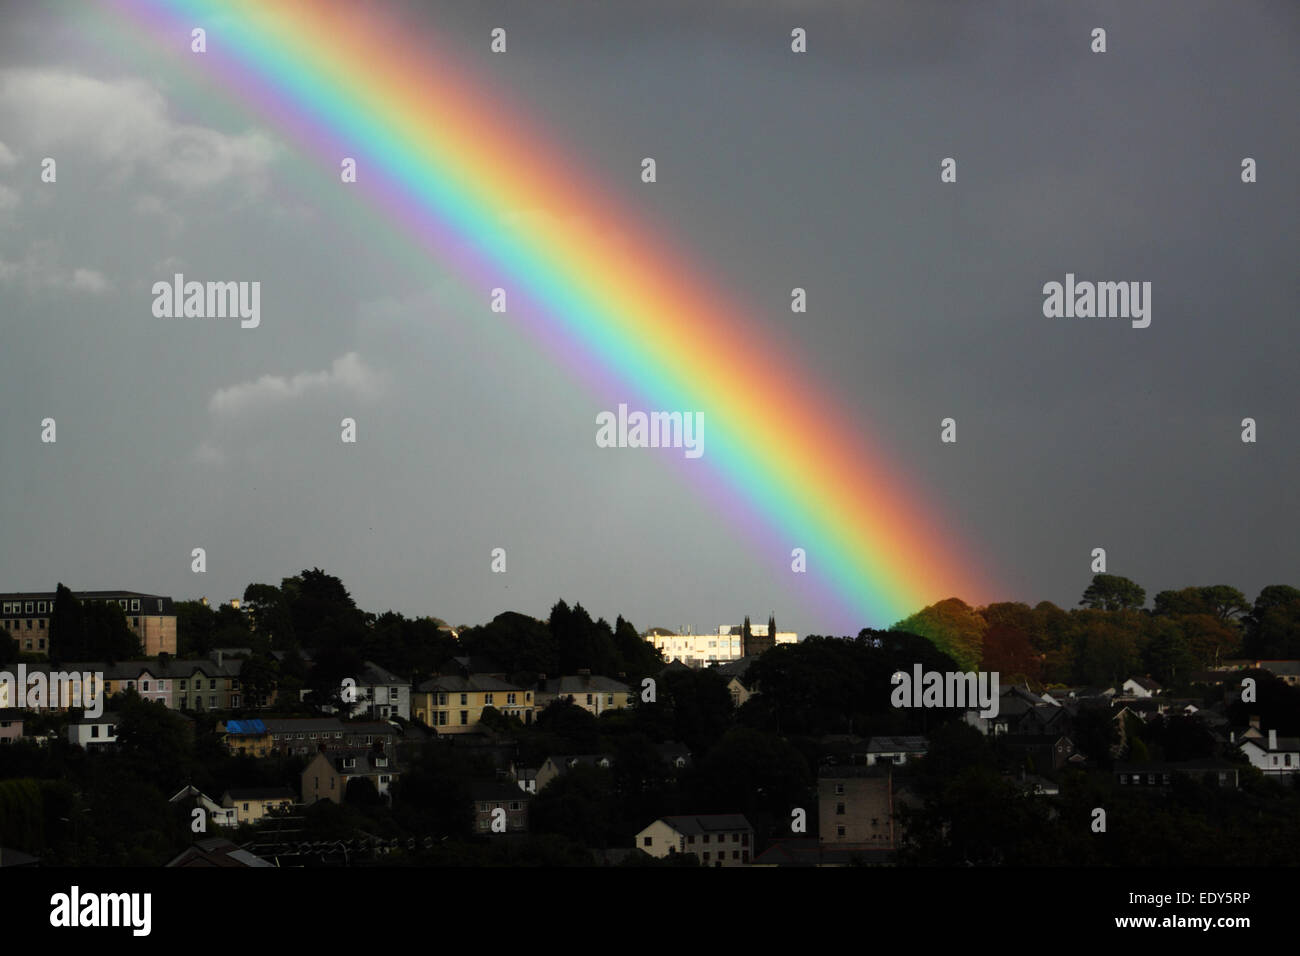 A bright rainbow's end with dark clouds and buildings. Stock Photo